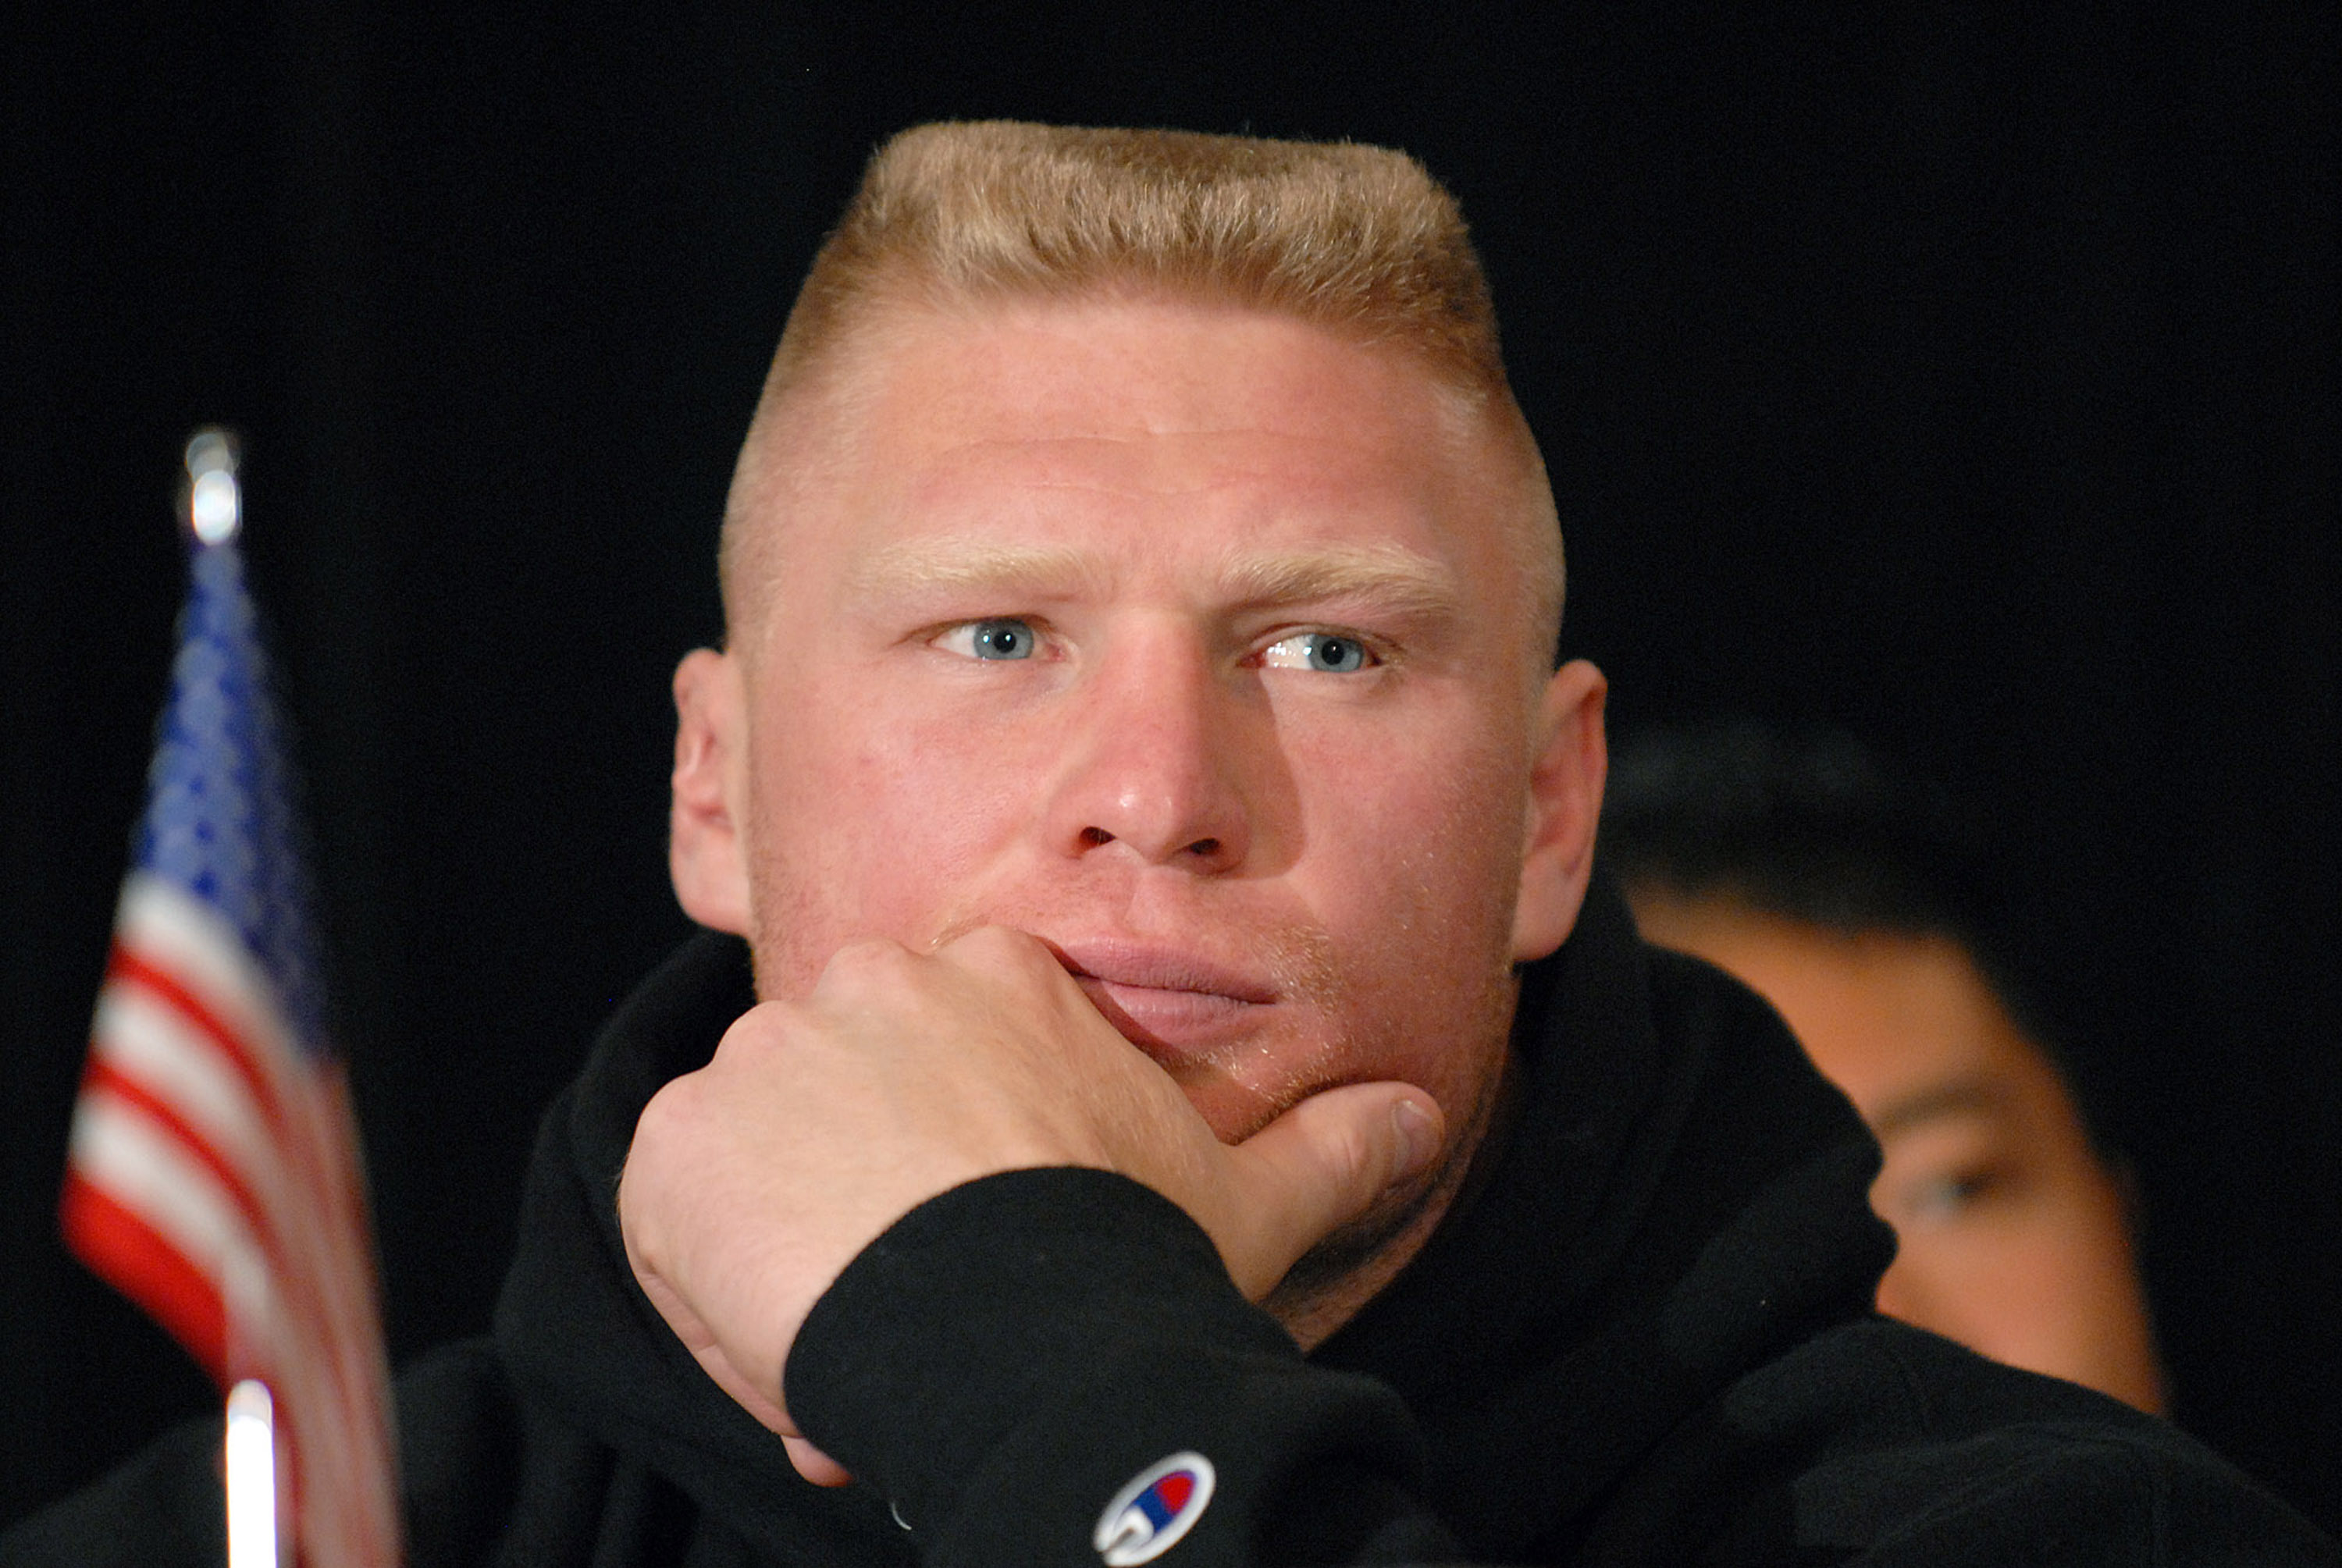 Brock Lesnar Was So Addicted to Vodka and Vicodin That He Doesn’t Remember His 1st Stint in the WWE